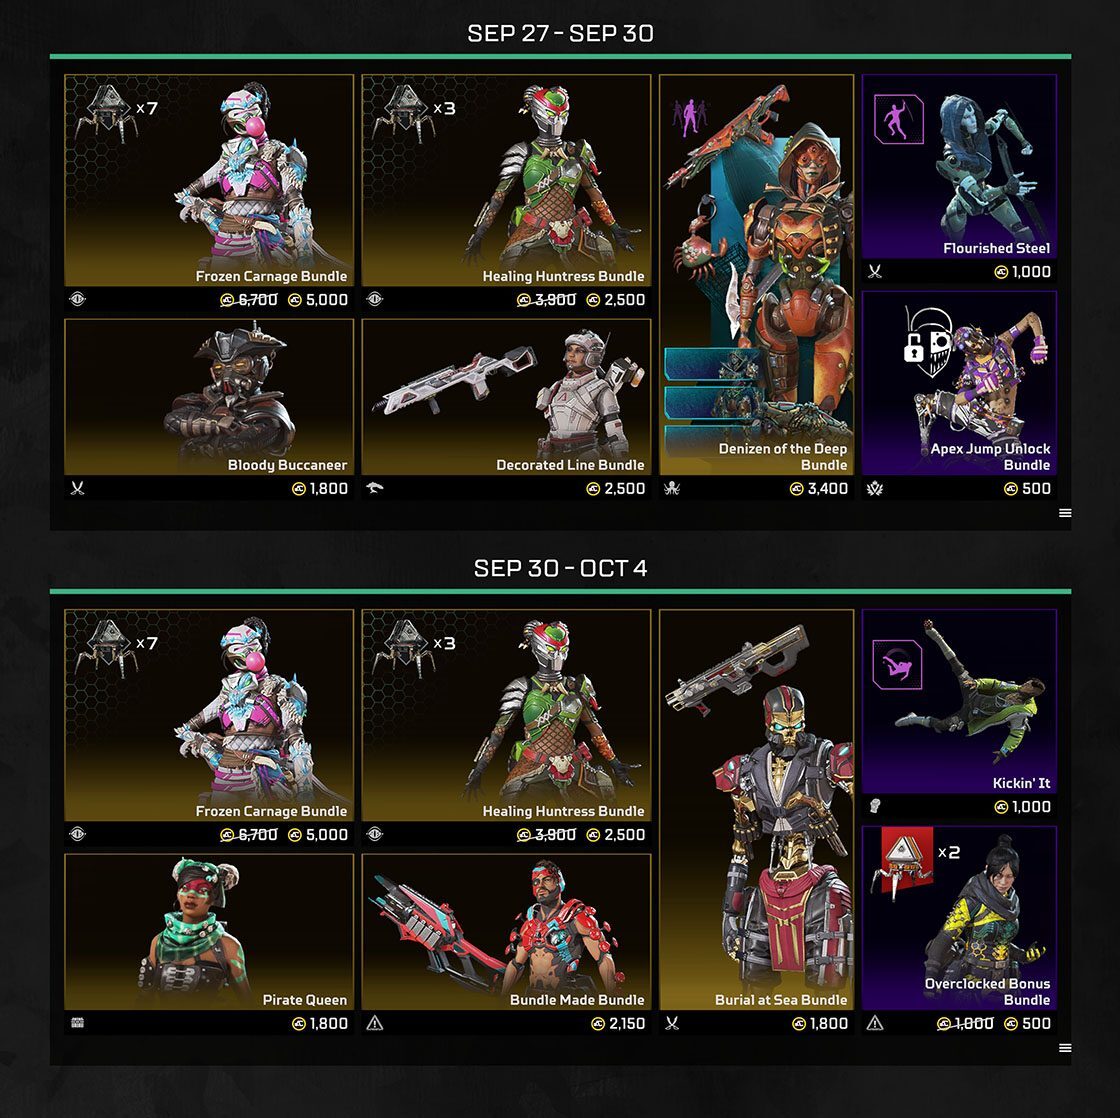 The second set of store bundles available during the event